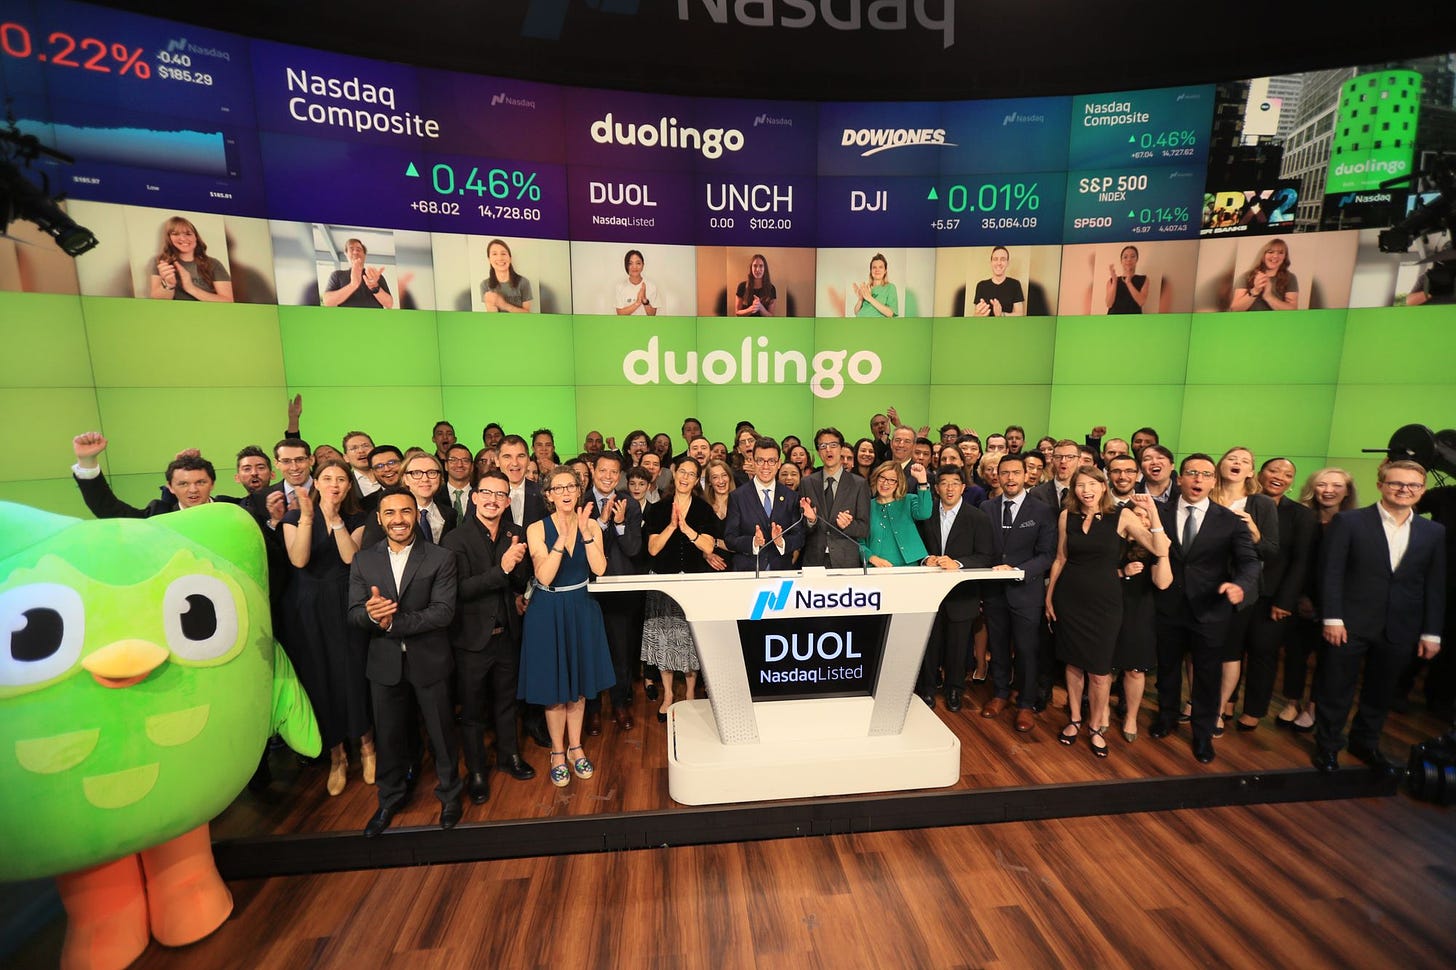 photogrpah of blog post author and Duolingo co-founder and CEO, Luis von Ahn, standing with a group of ~100 Duolingo employees and the green Duolingo owl mascot at the Nasdaq podium which is labeled "DUOL".